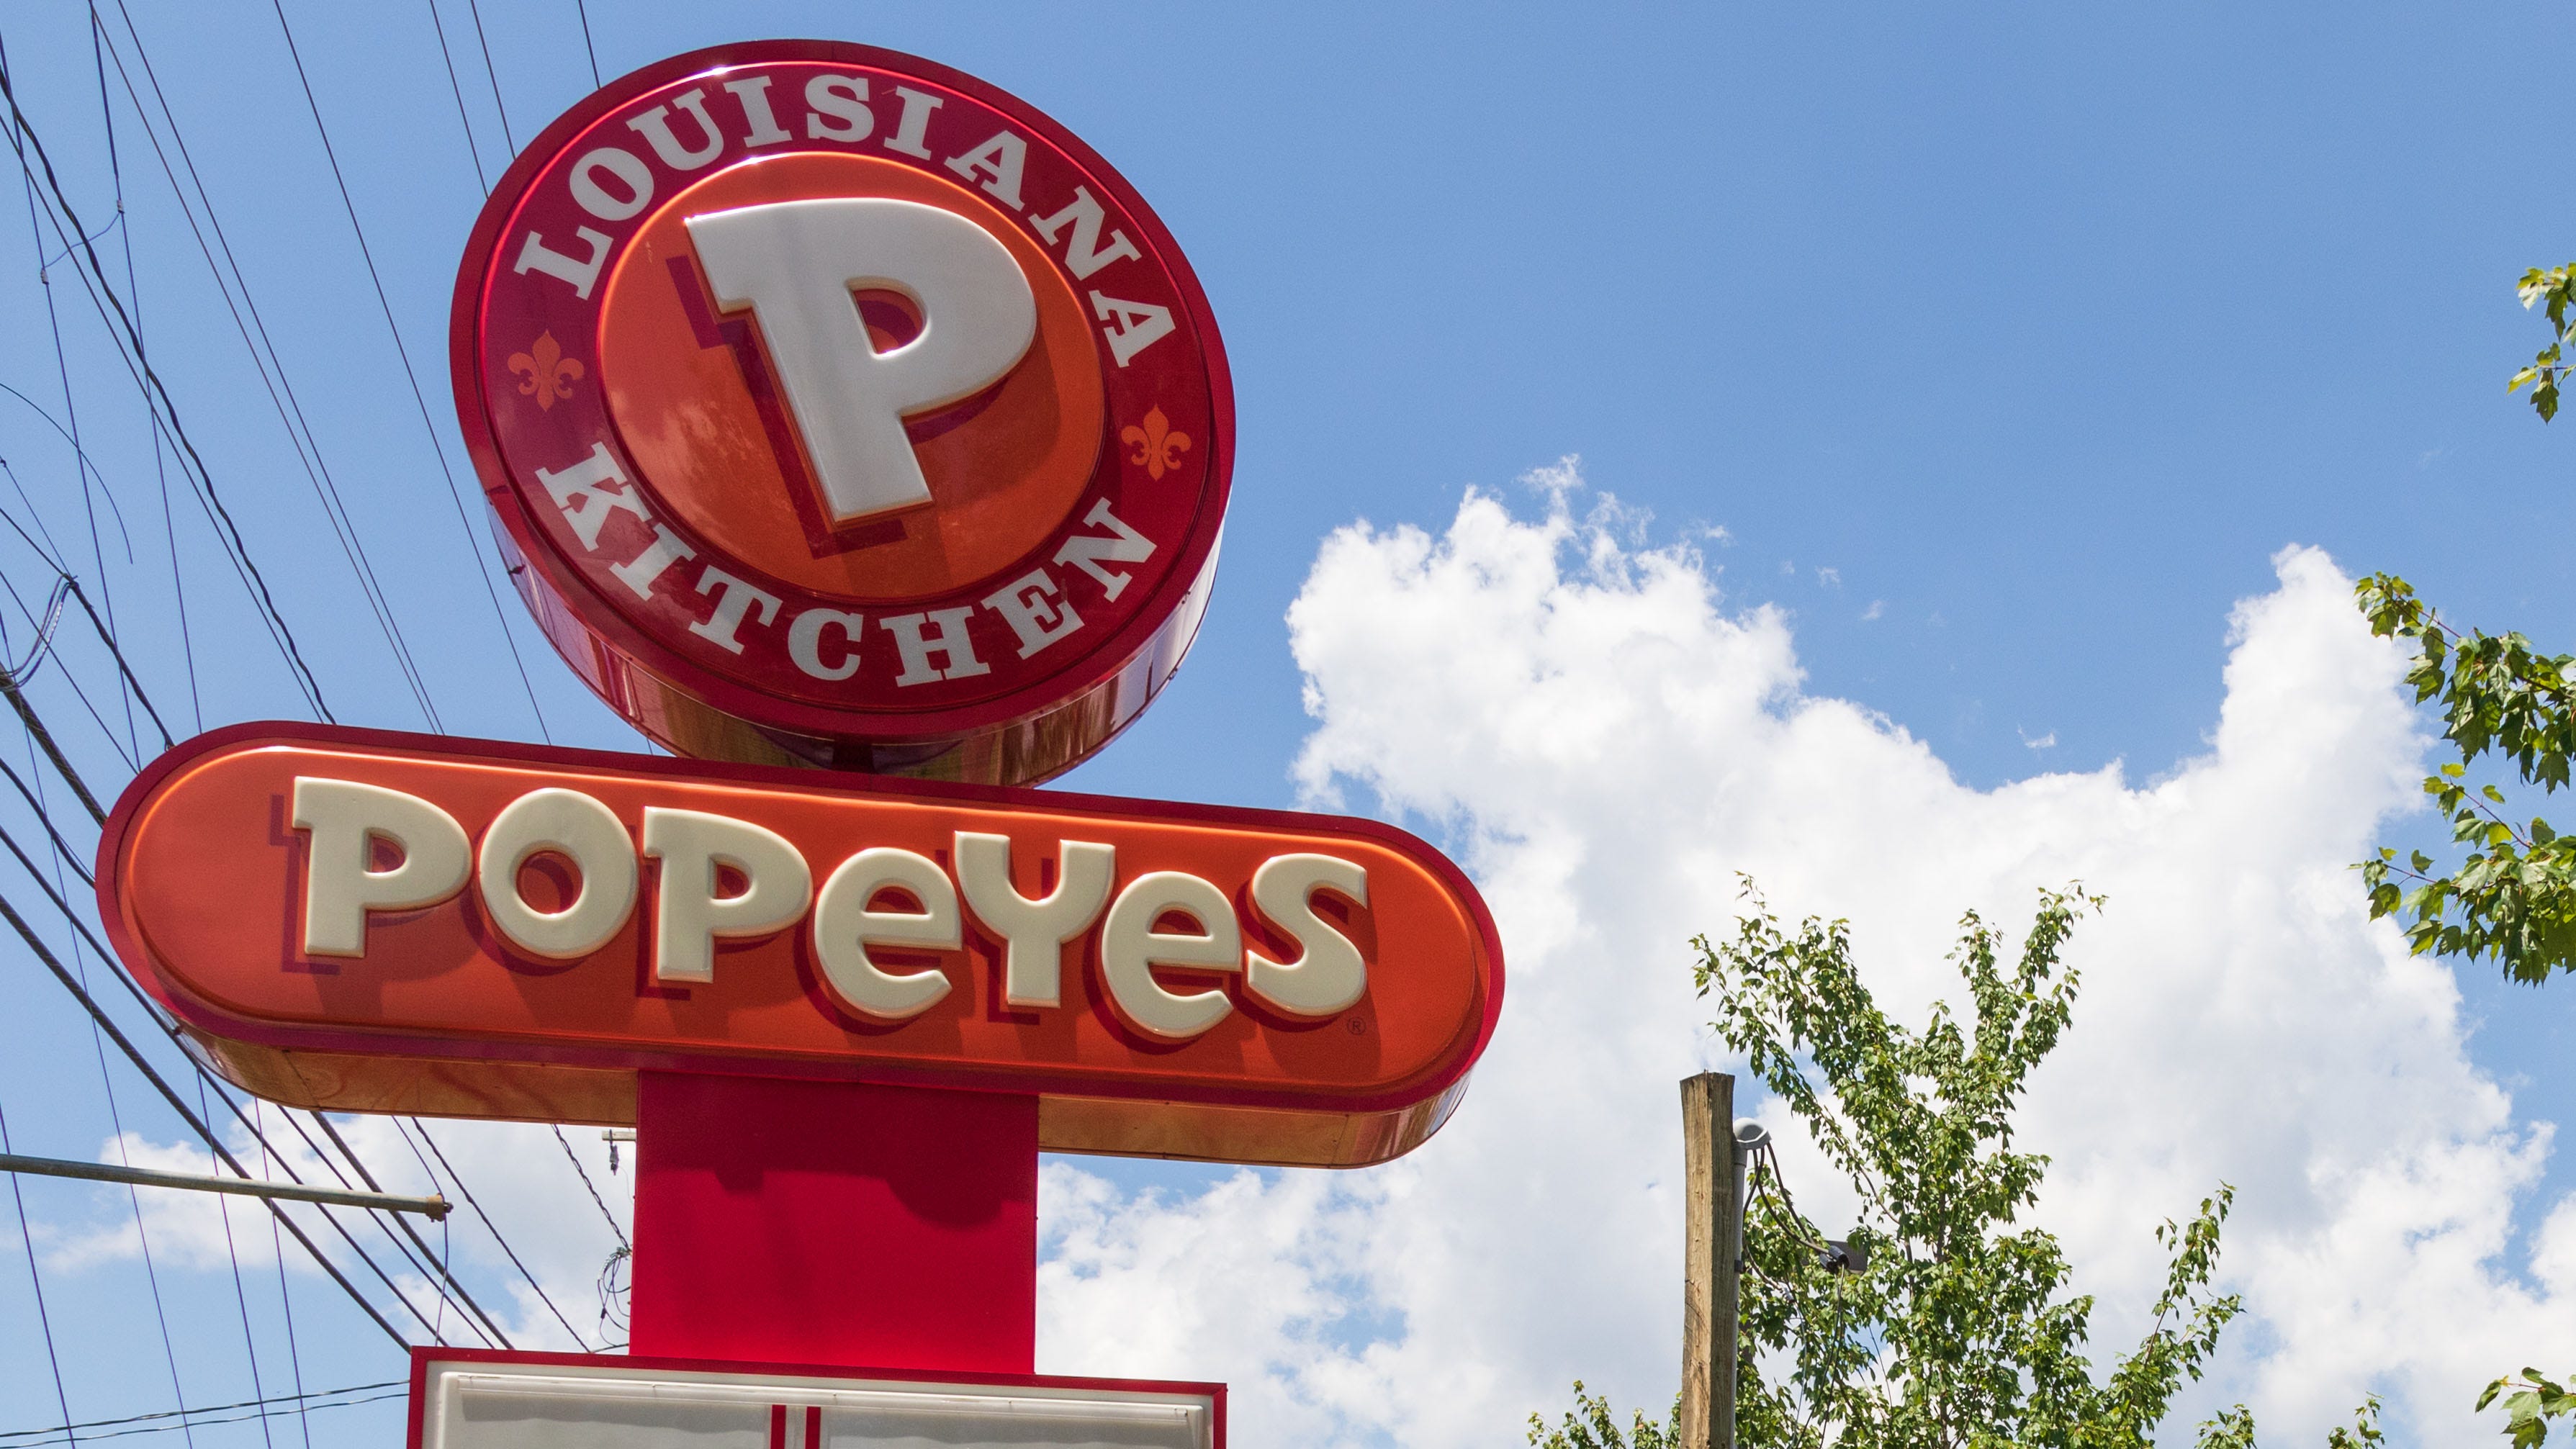 Massachusetts Popeyes employees attacked, restaurant damaged by customers over wrong orders: report